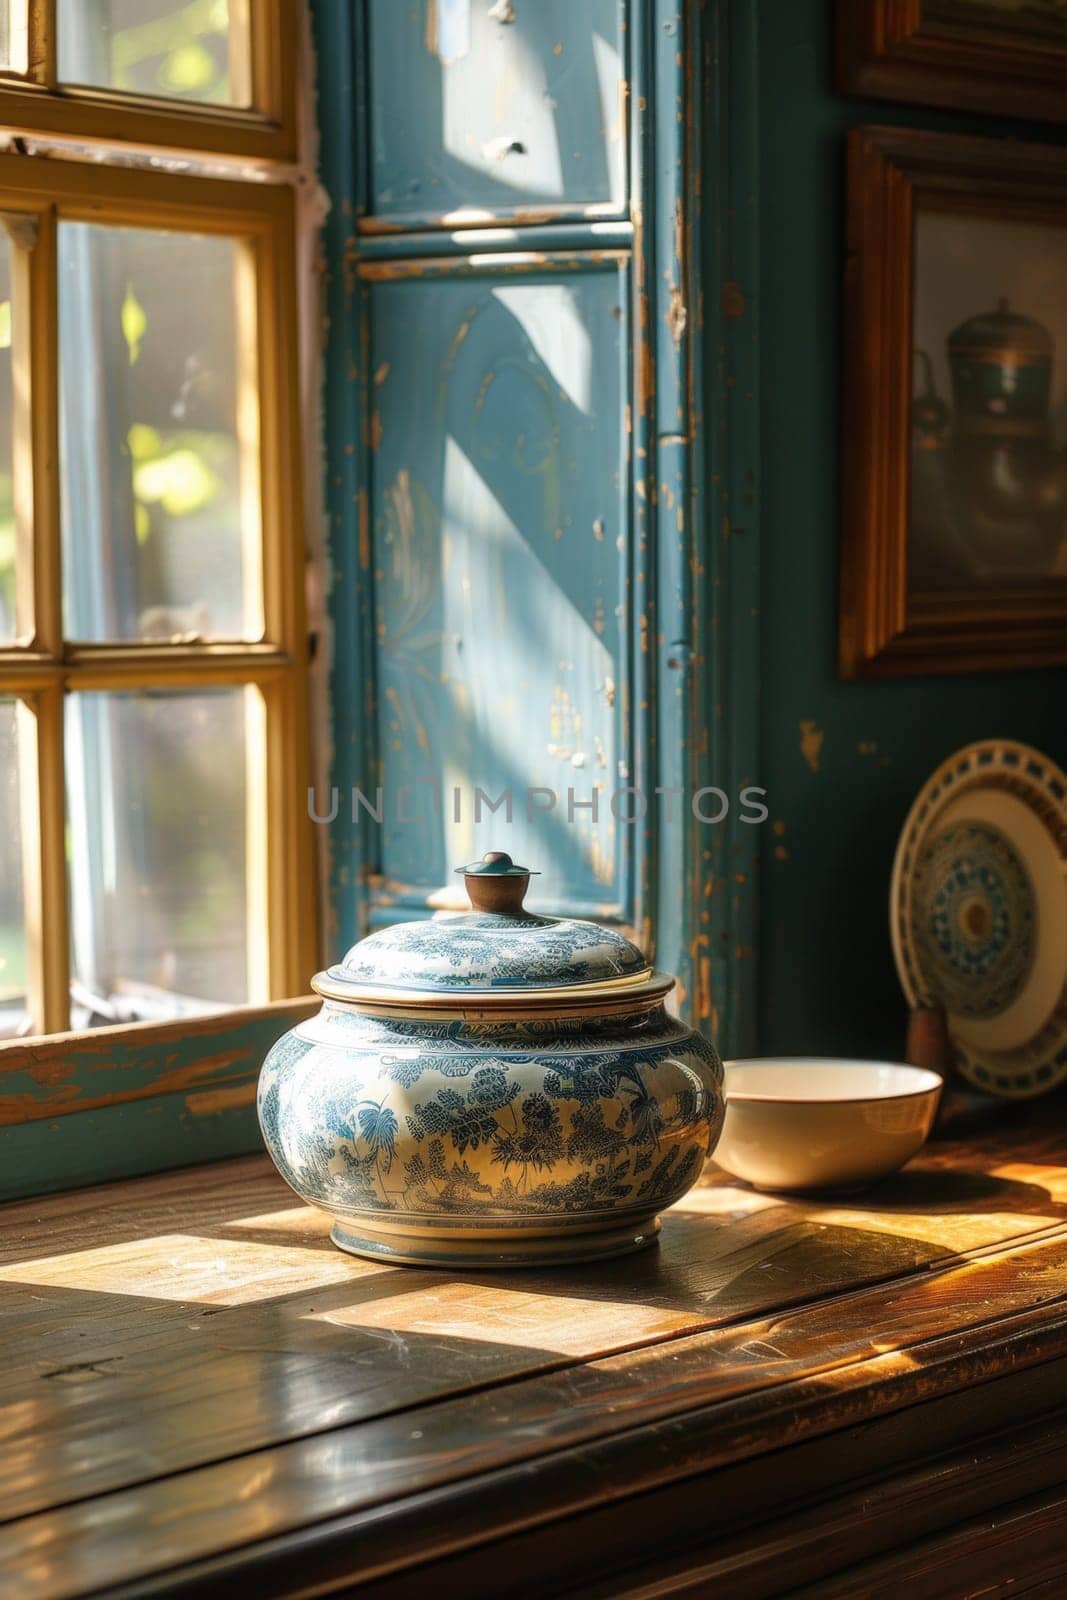 A blue and white pot sitting on a wooden counter next to some dishes